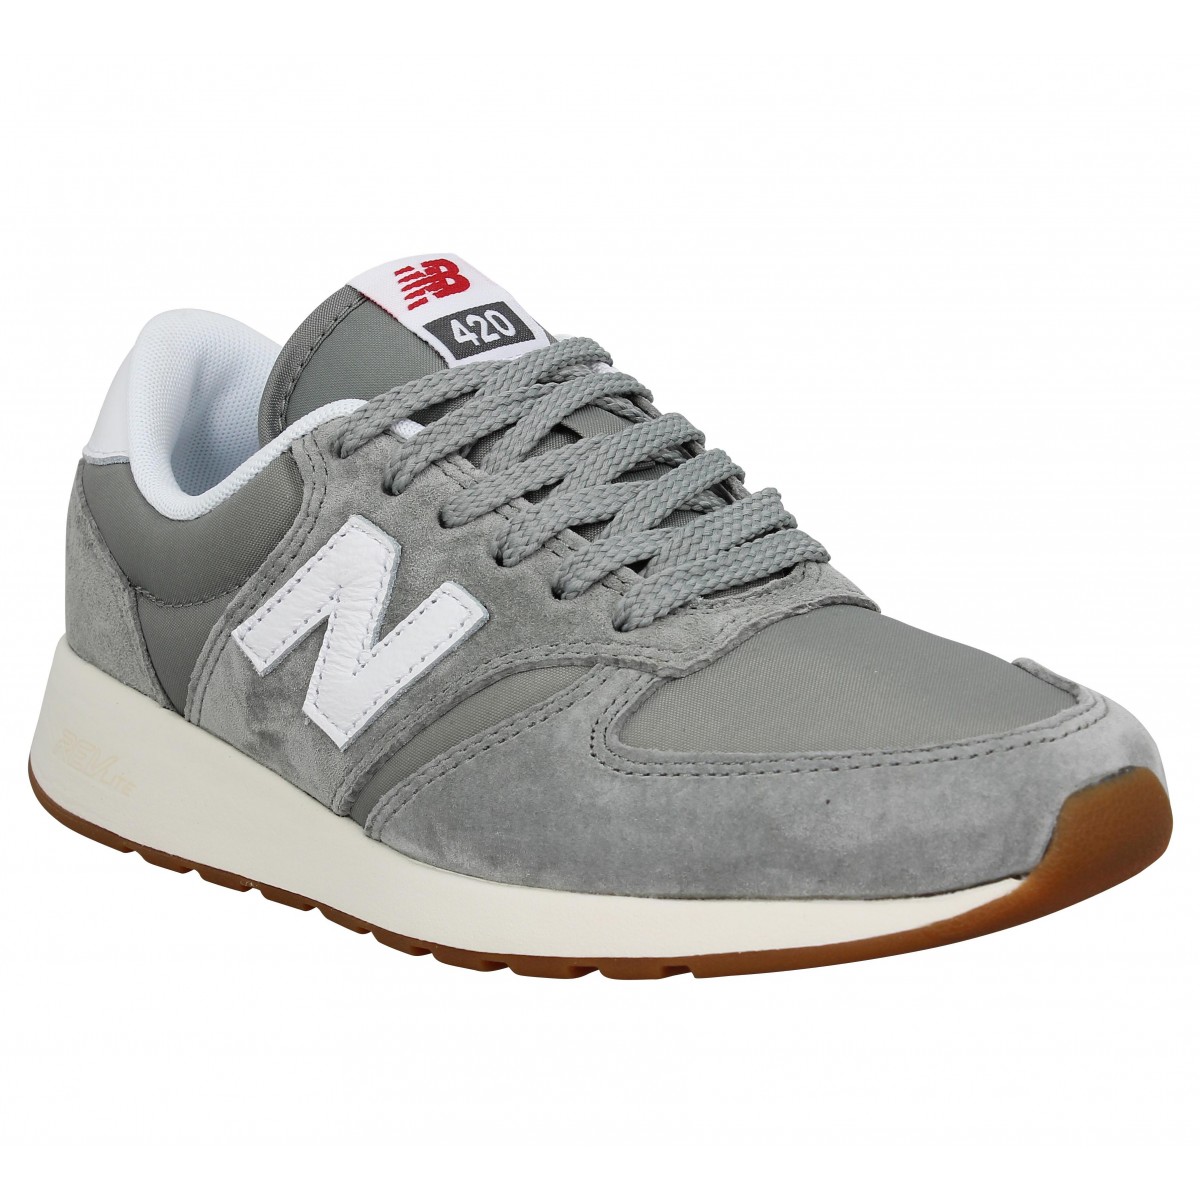 Refinería Catedral contacto New balance wrl 420 velours toile femme gris femme | Fanny chaussures